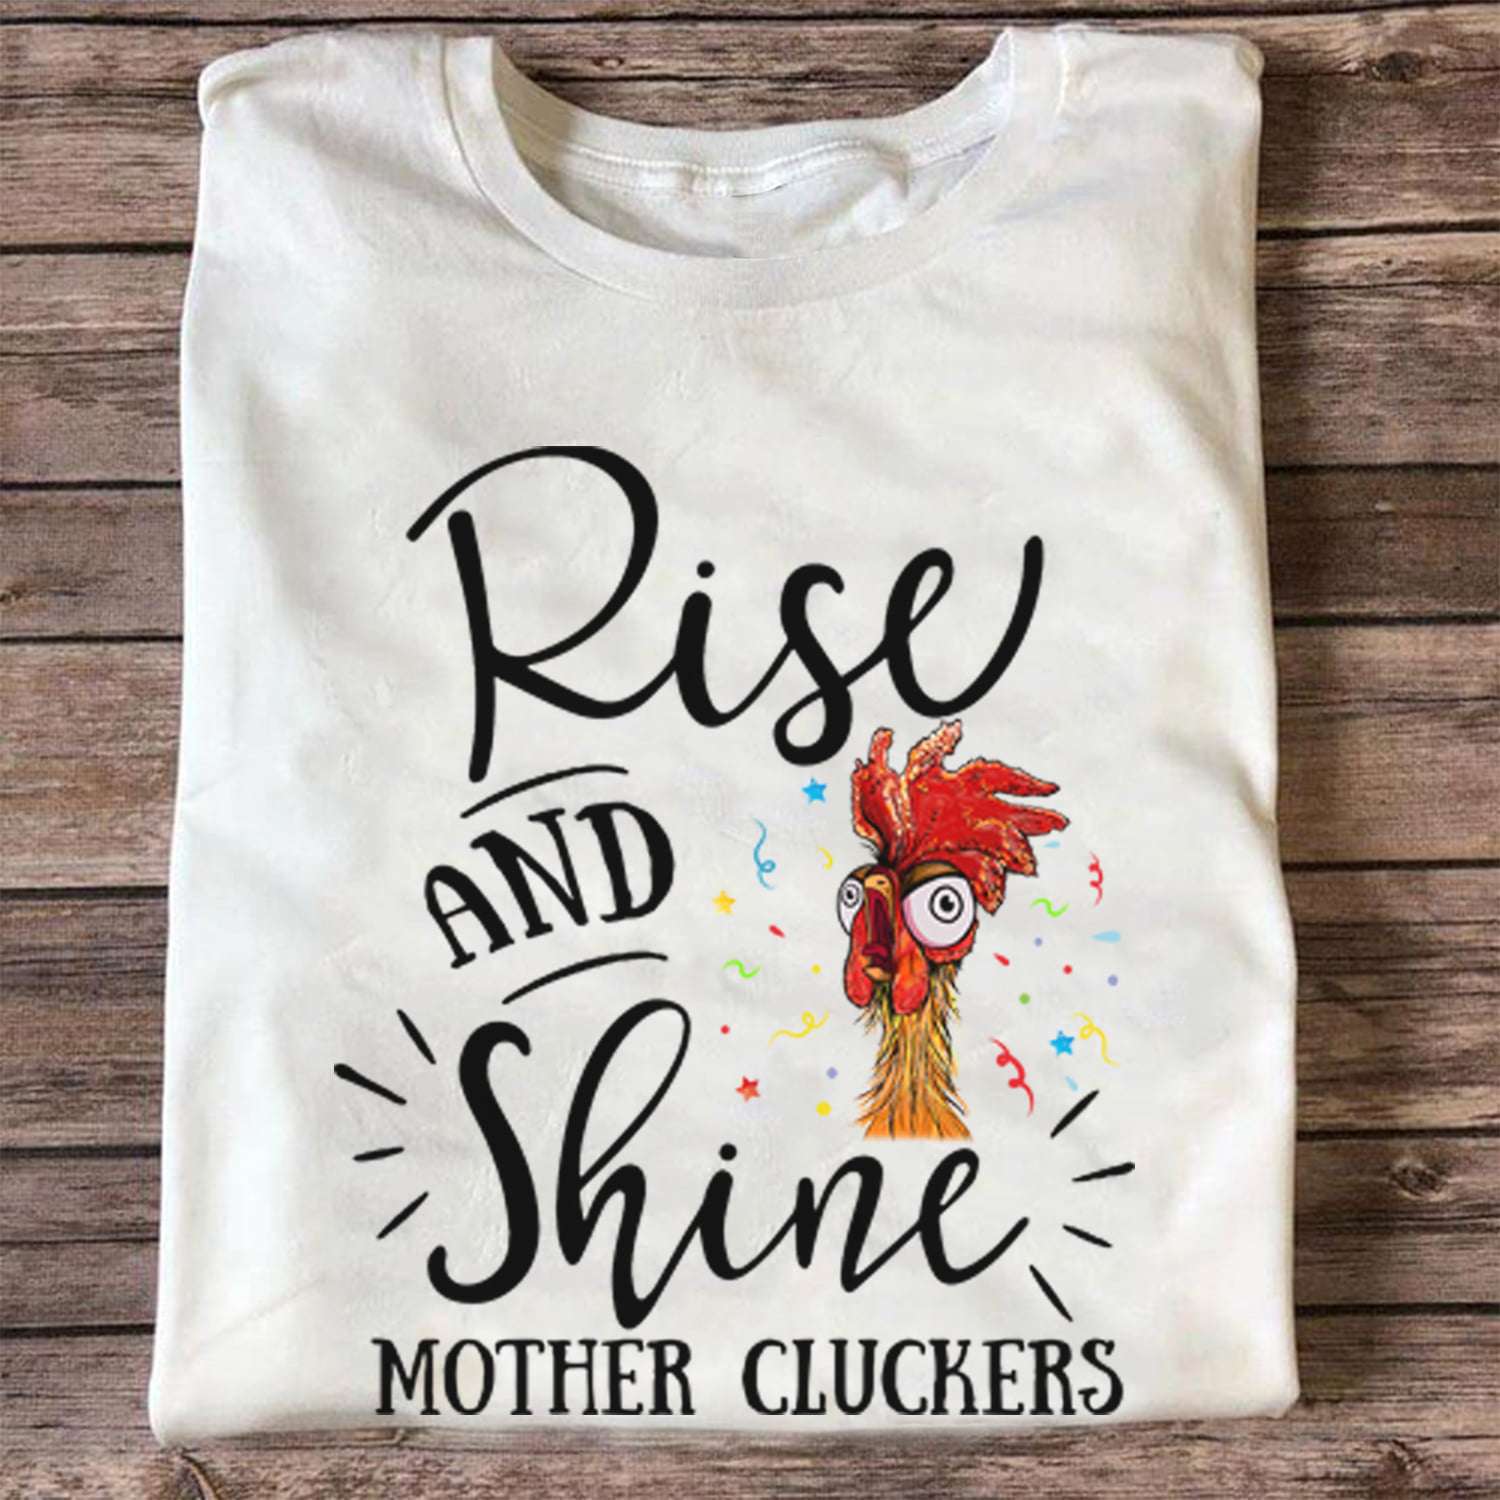 Rise and shine - Mother cluckers, crazy chicken mom